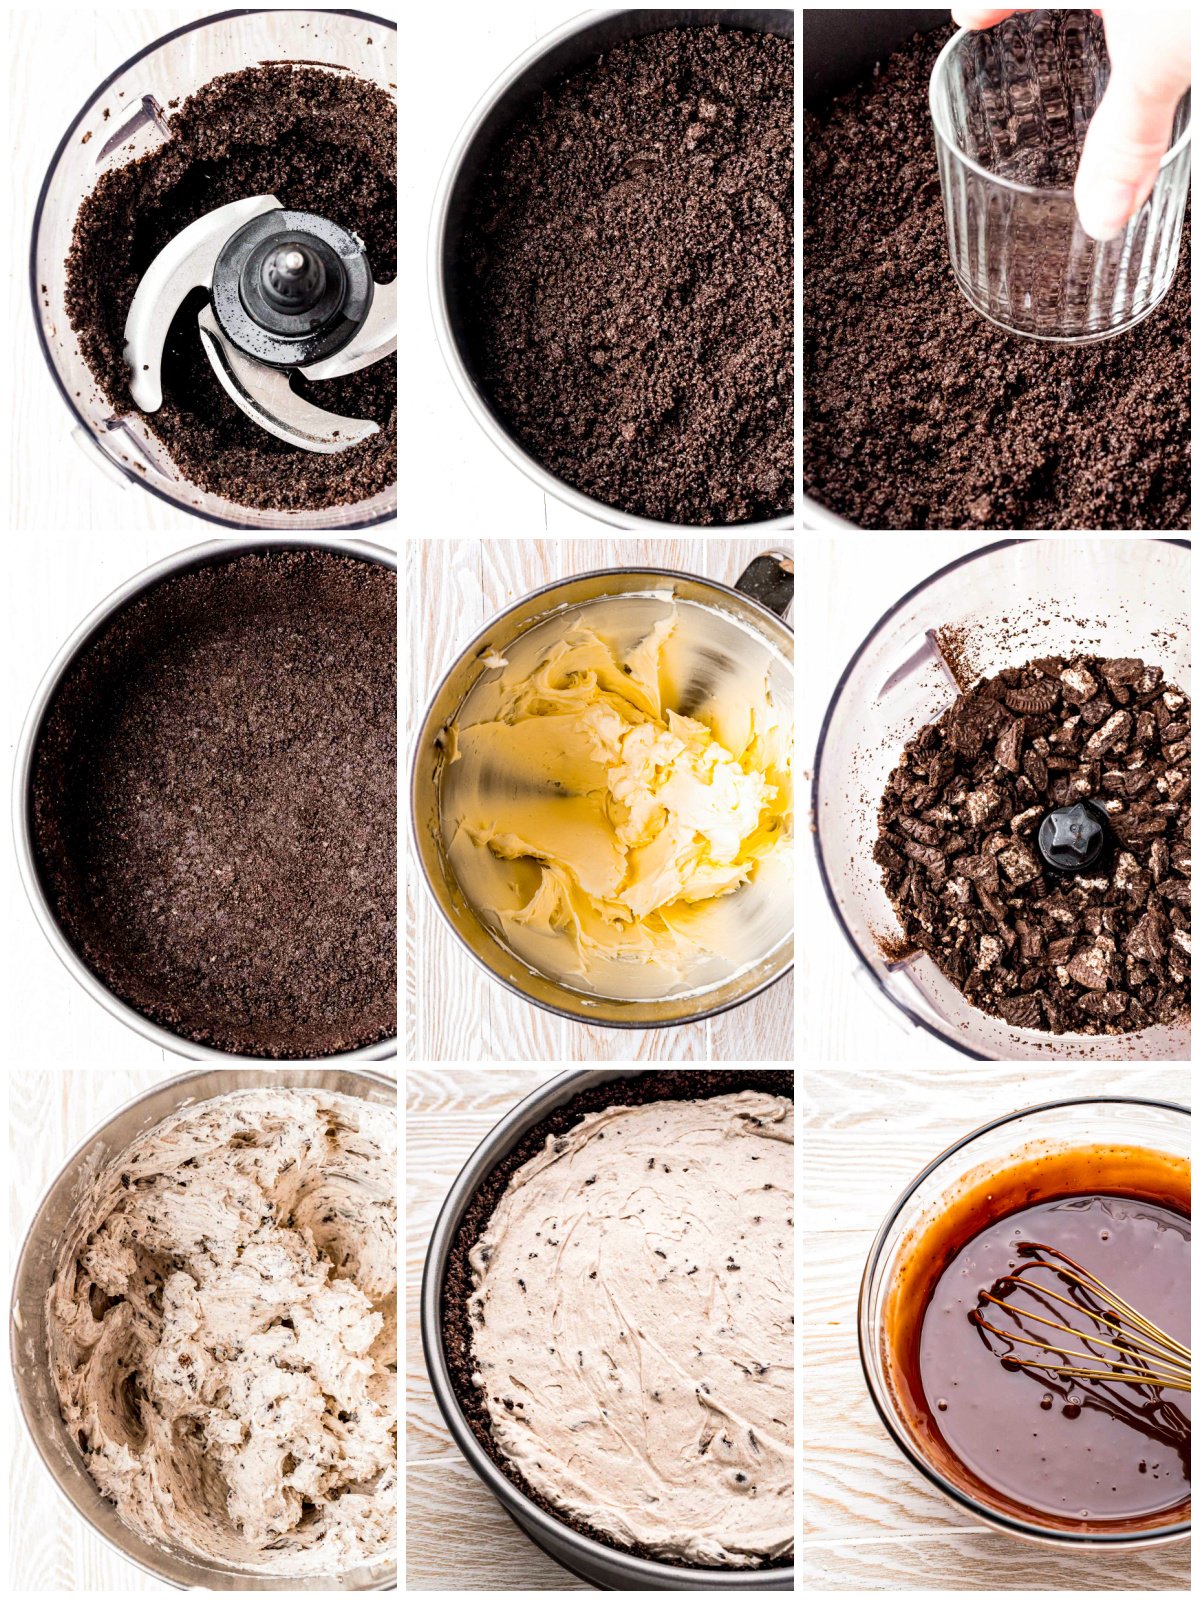 Step by step photos on how to make a No Bake Oreo Cheesecake.